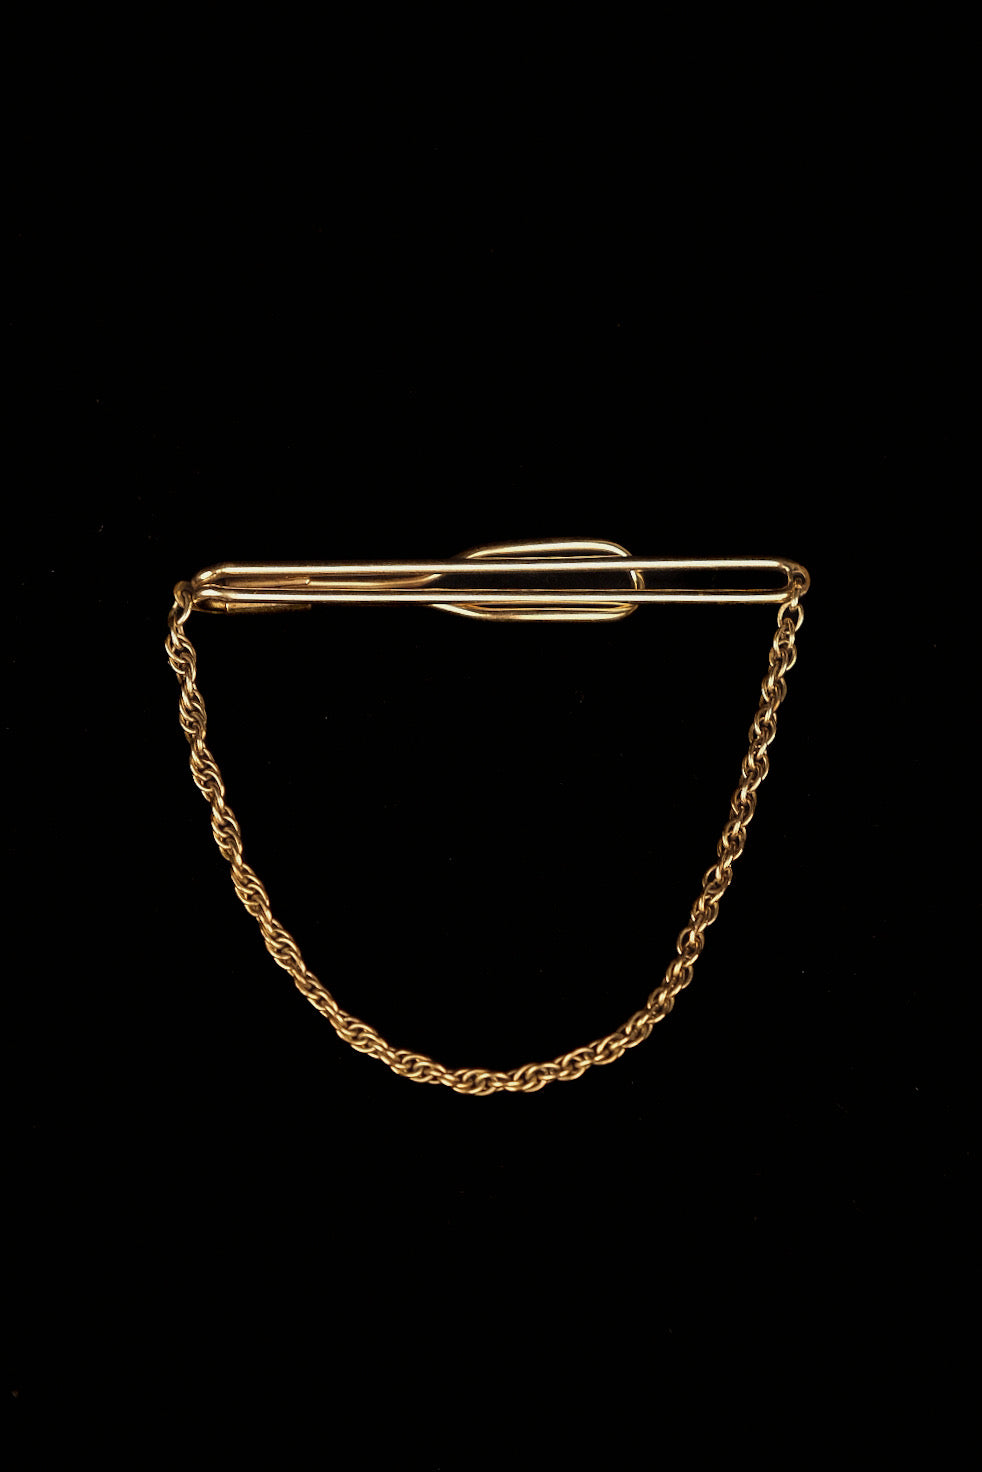 12K Gold Filled Tie Bar With Decorative Chain